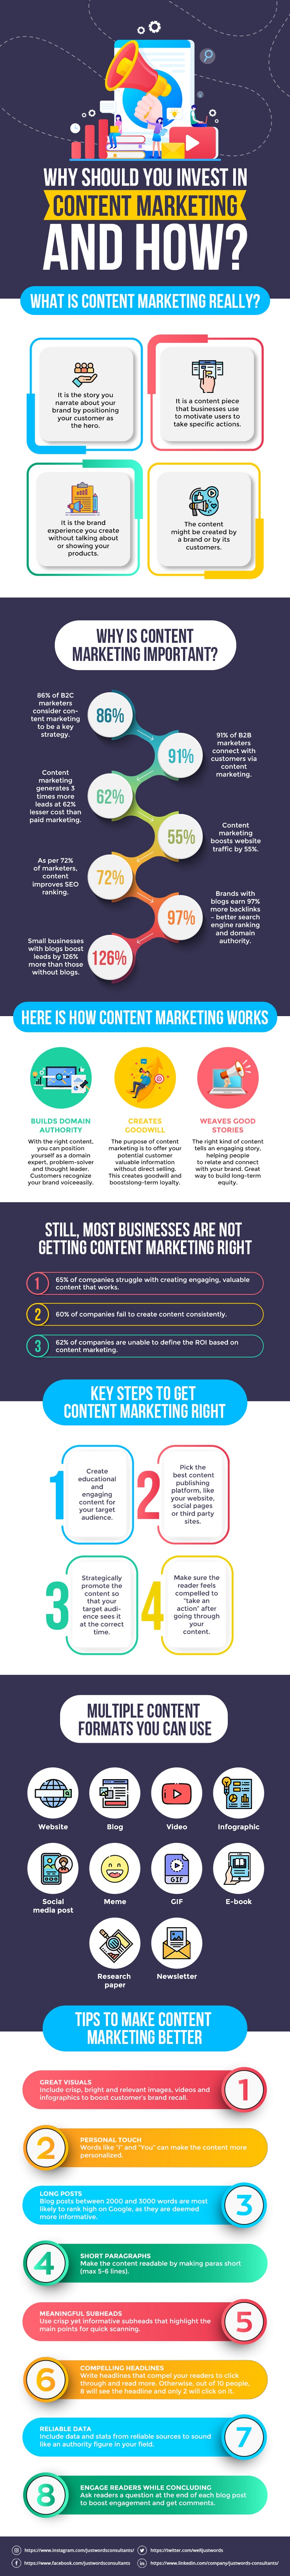 Why should you invest in content marketing and how